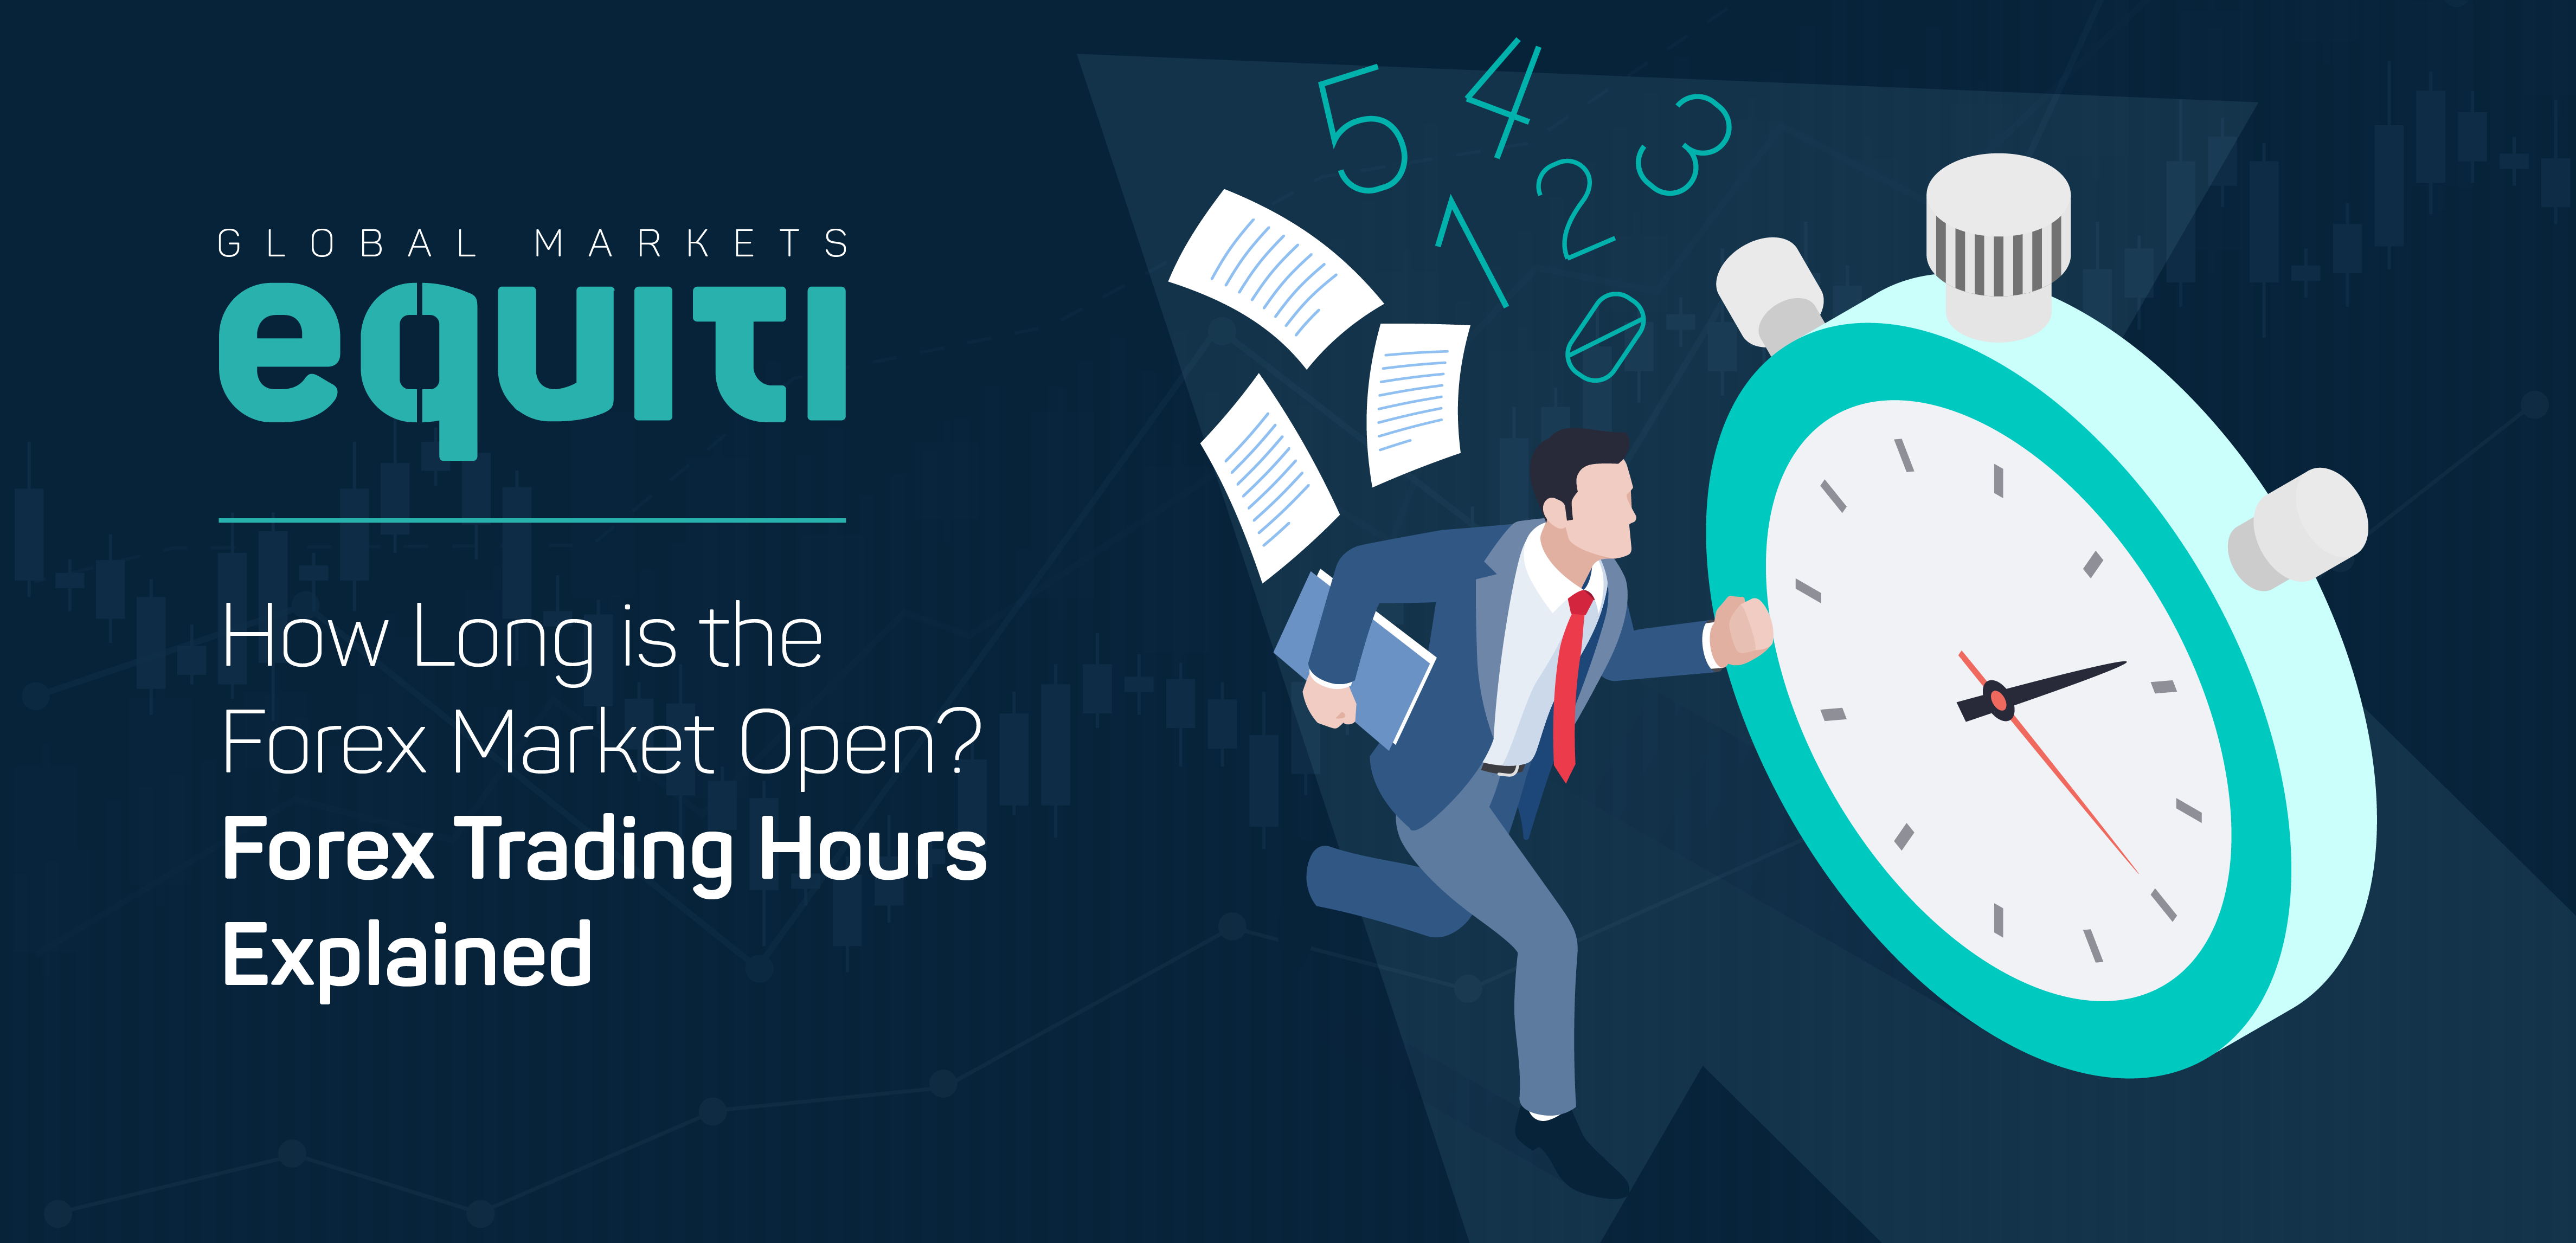 How Long is the Forex Market Open? Forex Trading Hours Explained